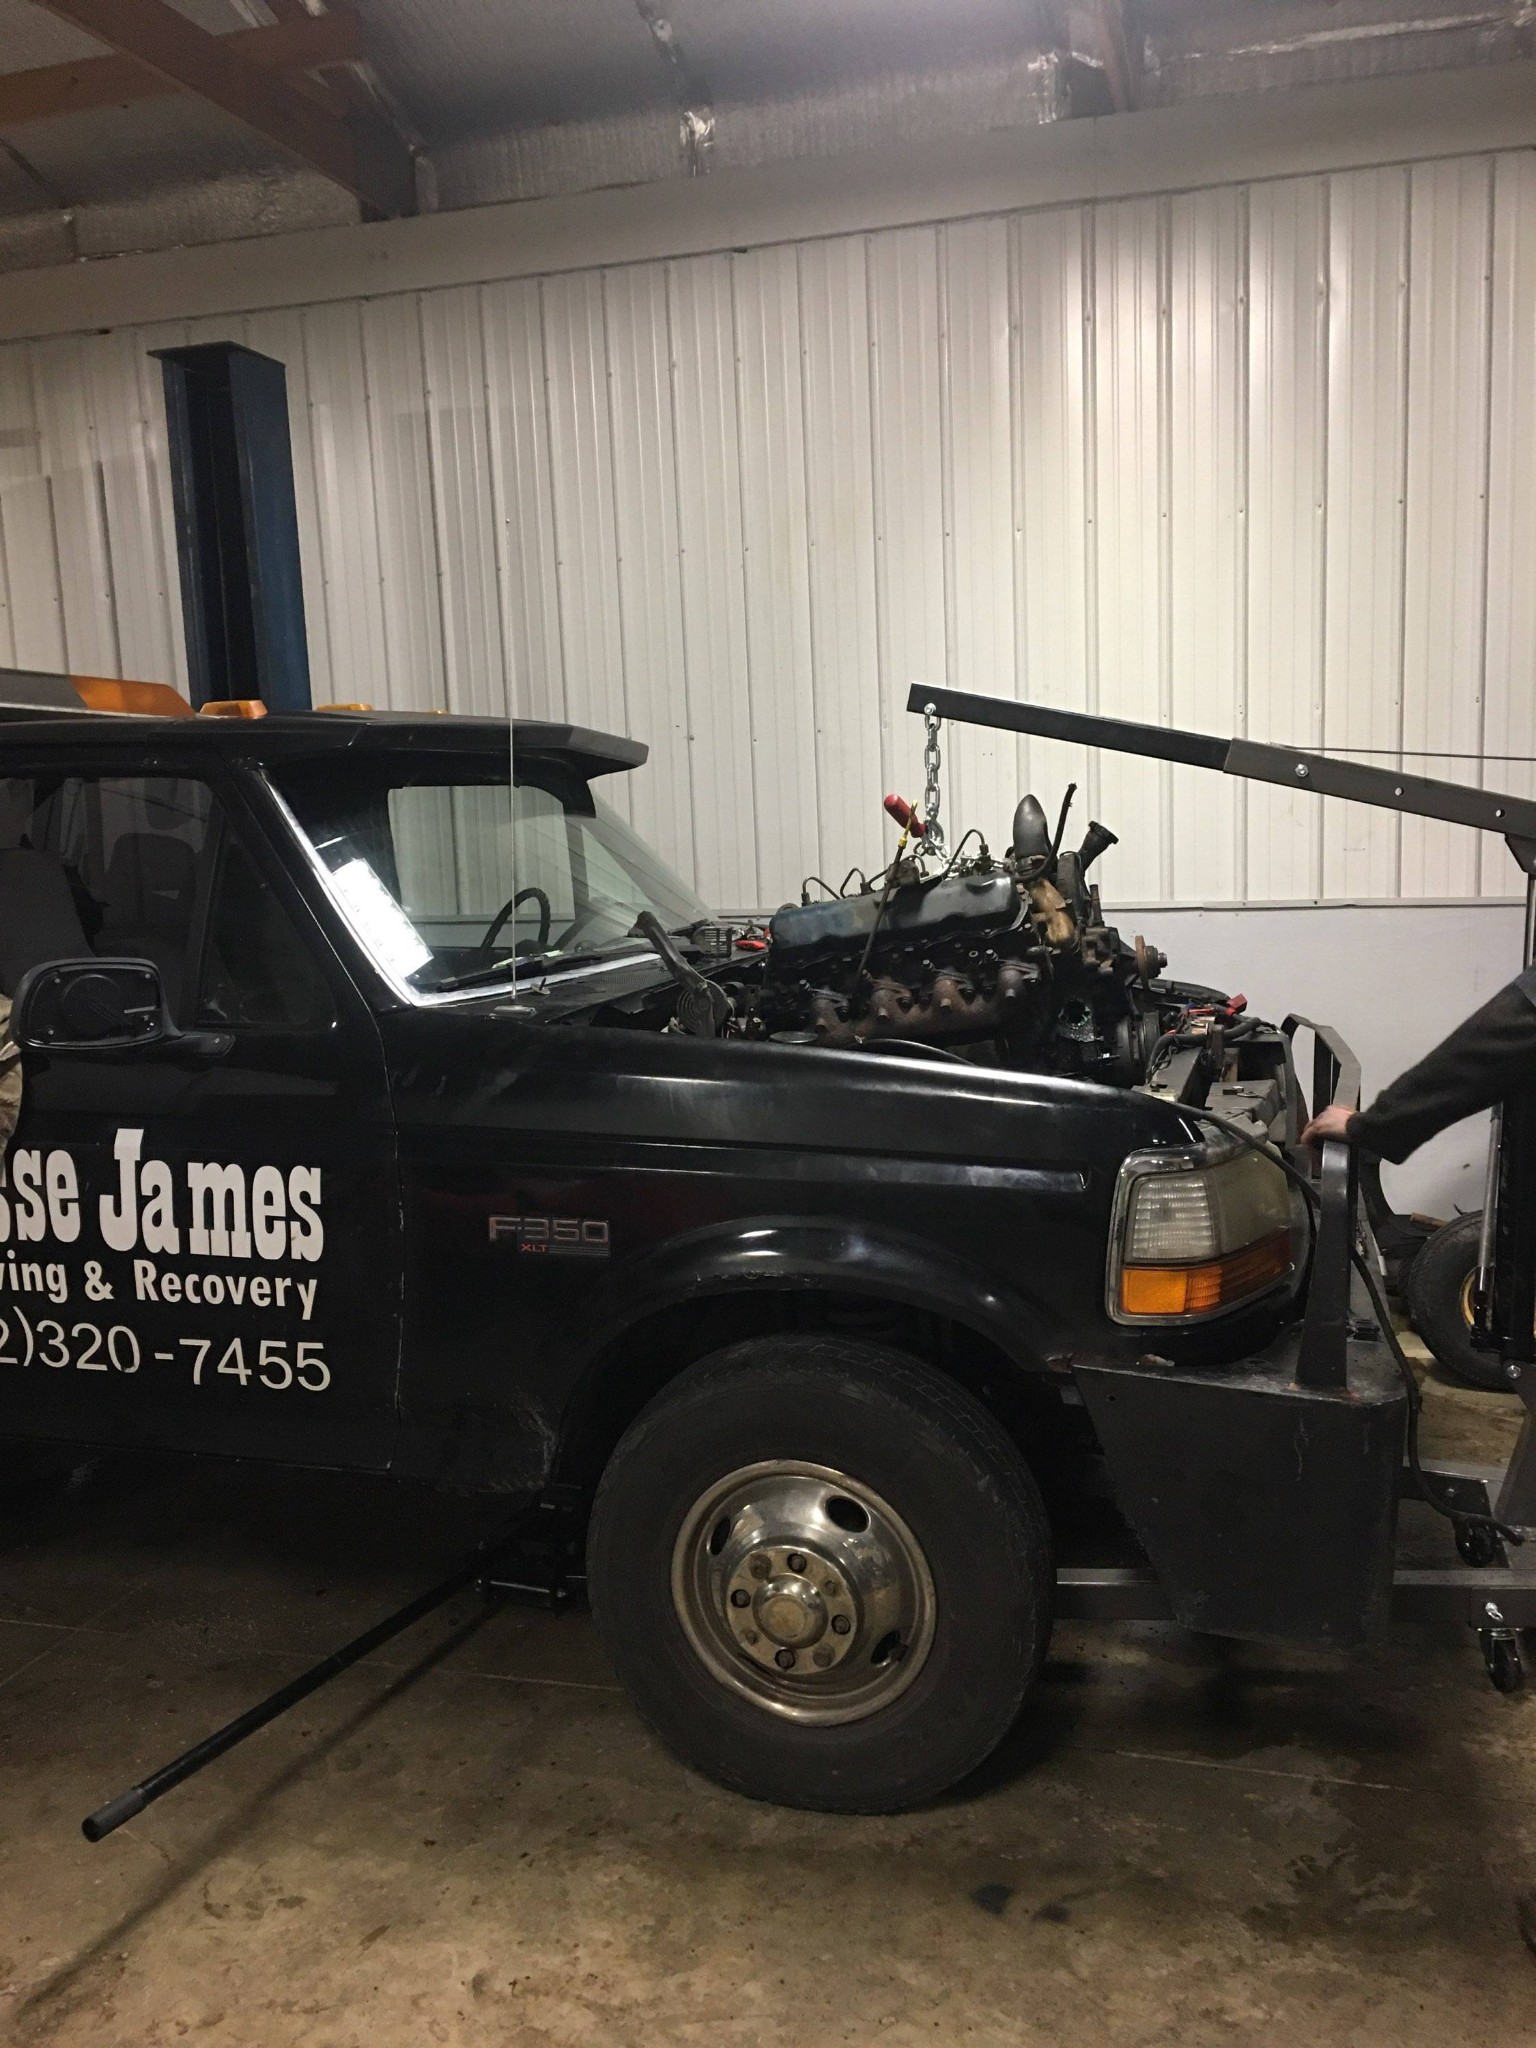 Jesse James Towing & Recovery Photo